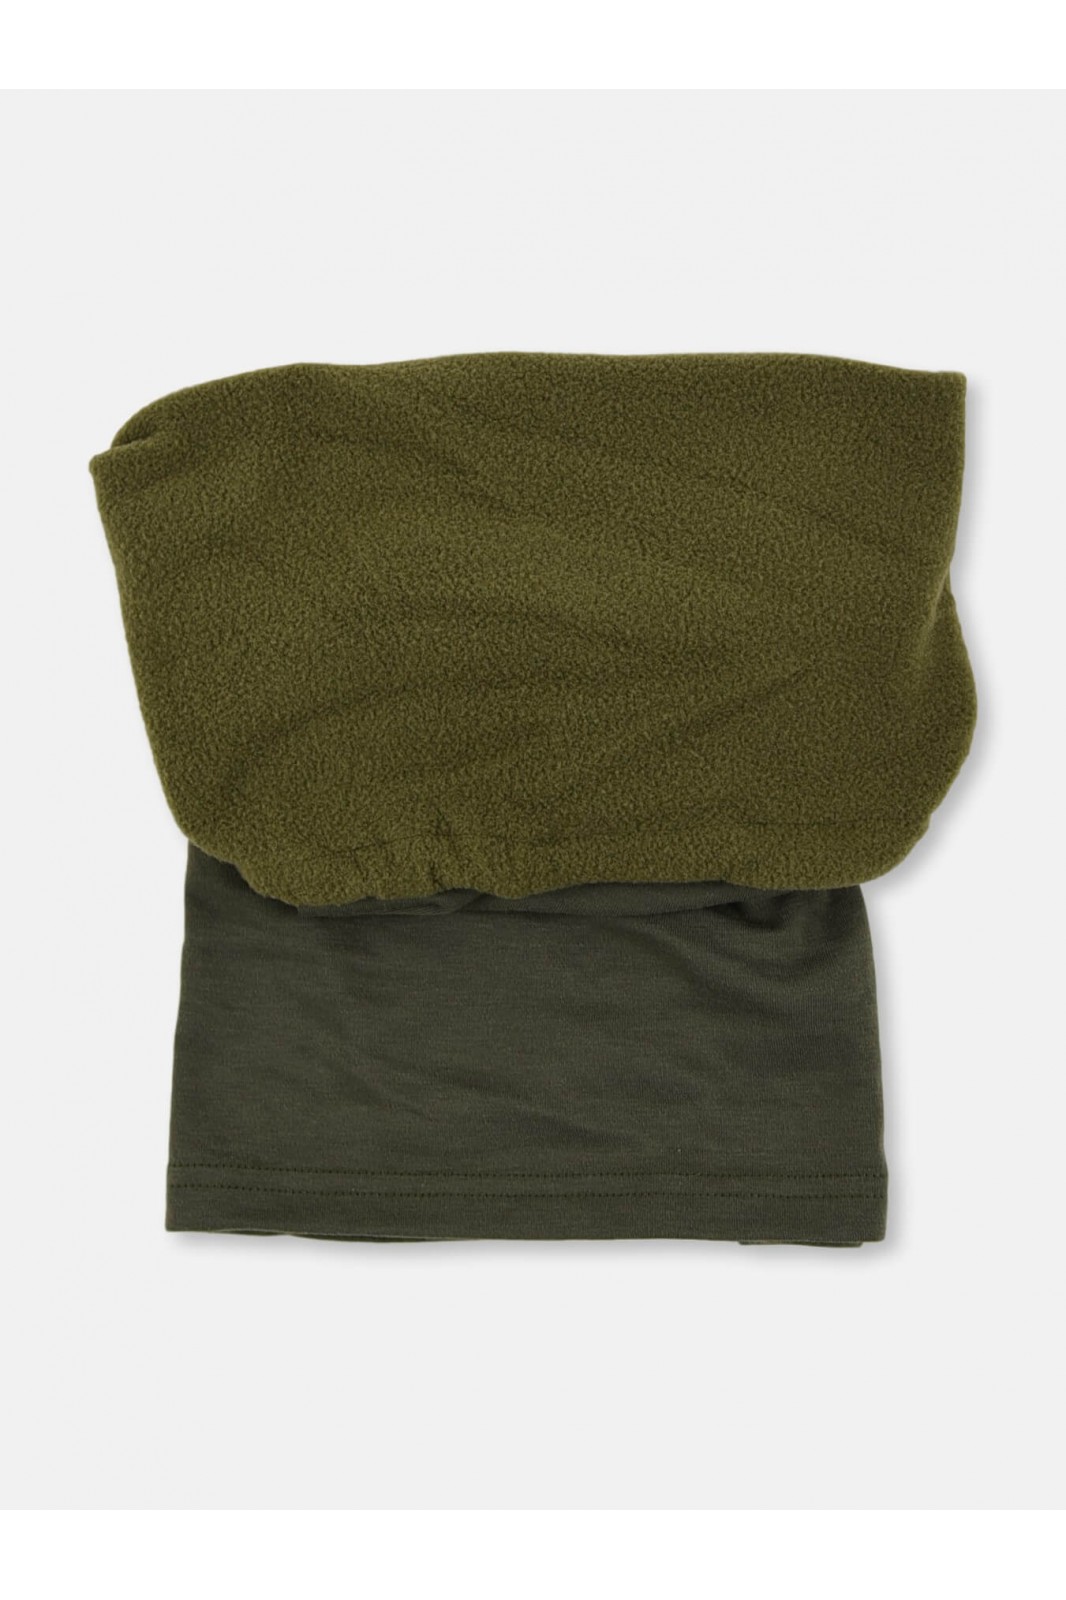 Army Race Isothermal Neck Warmer Khaki with hood